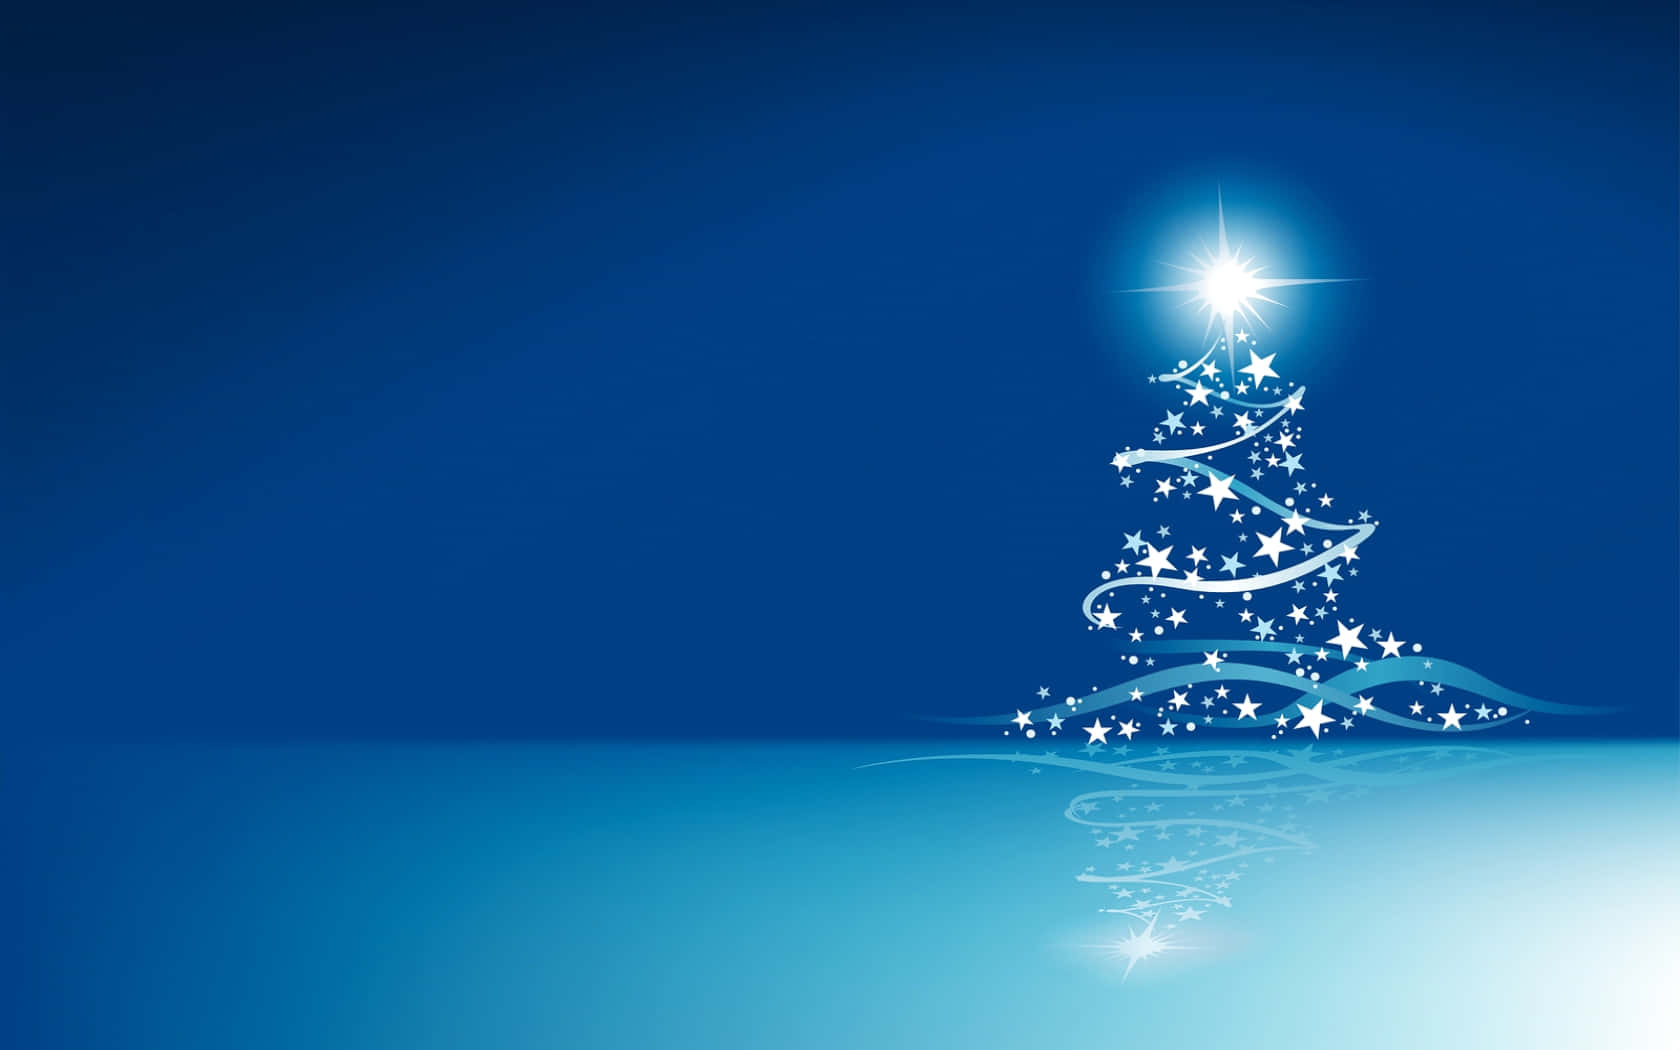 Christmas Tree Of Stars In Blue Christmas Theme Background